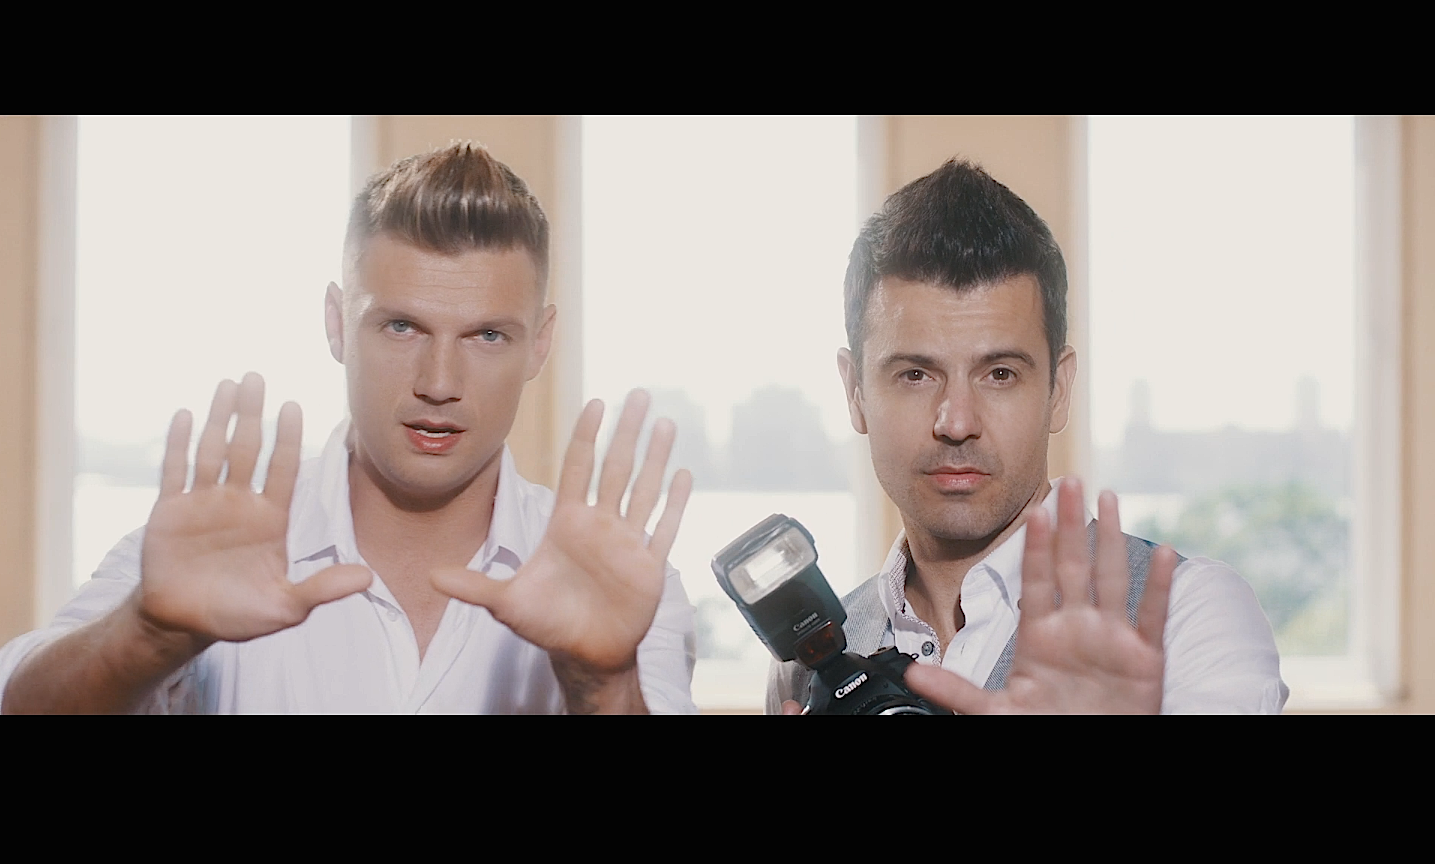 Nick & Knight Drop First Music Video – “One More Time”